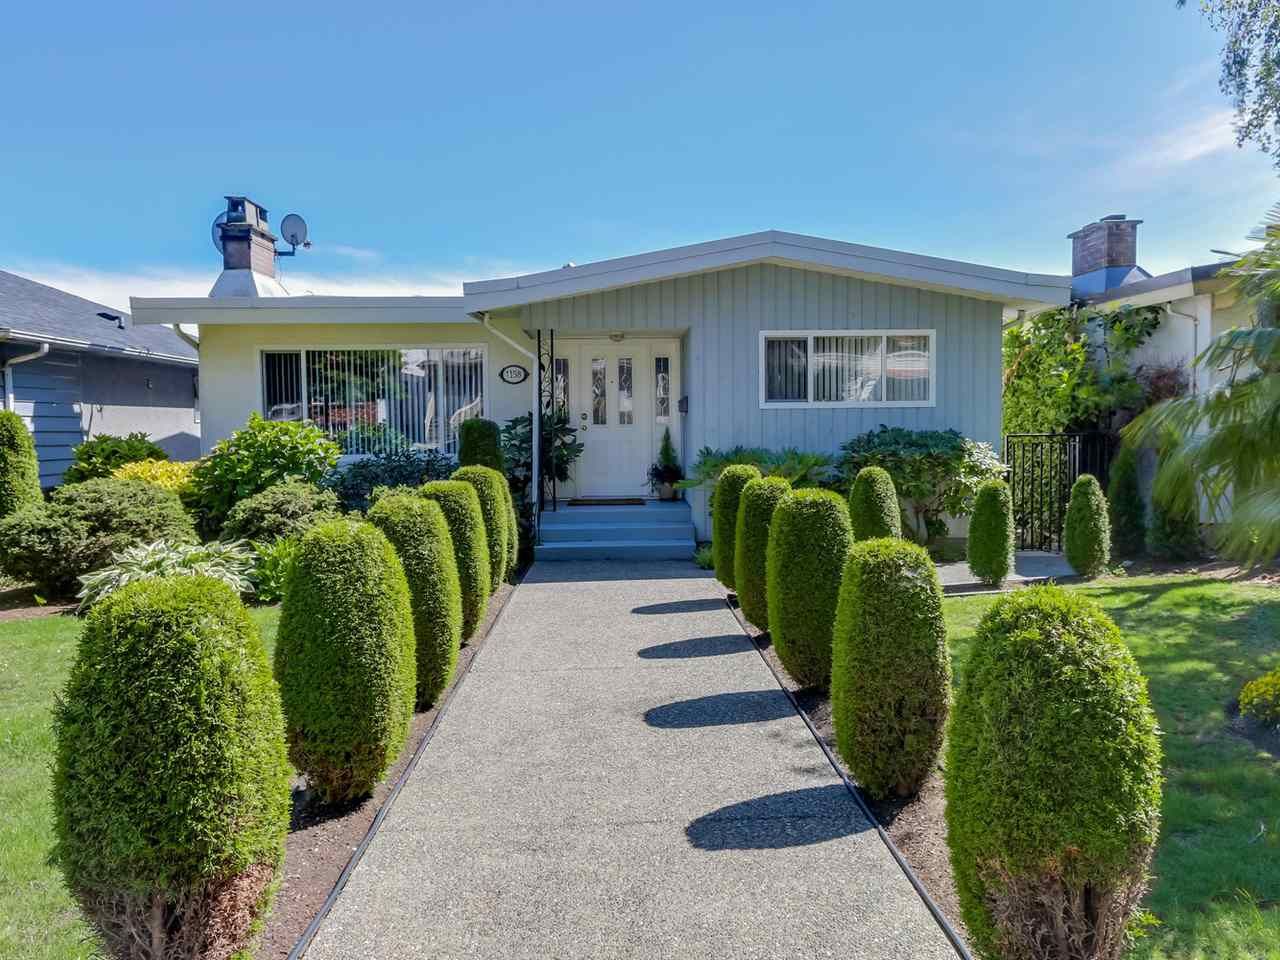 Main Photo: 1158 E 62ND AVENUE in Vancouver: South Vancouver House for sale (Vancouver East)  : MLS®# R2082544